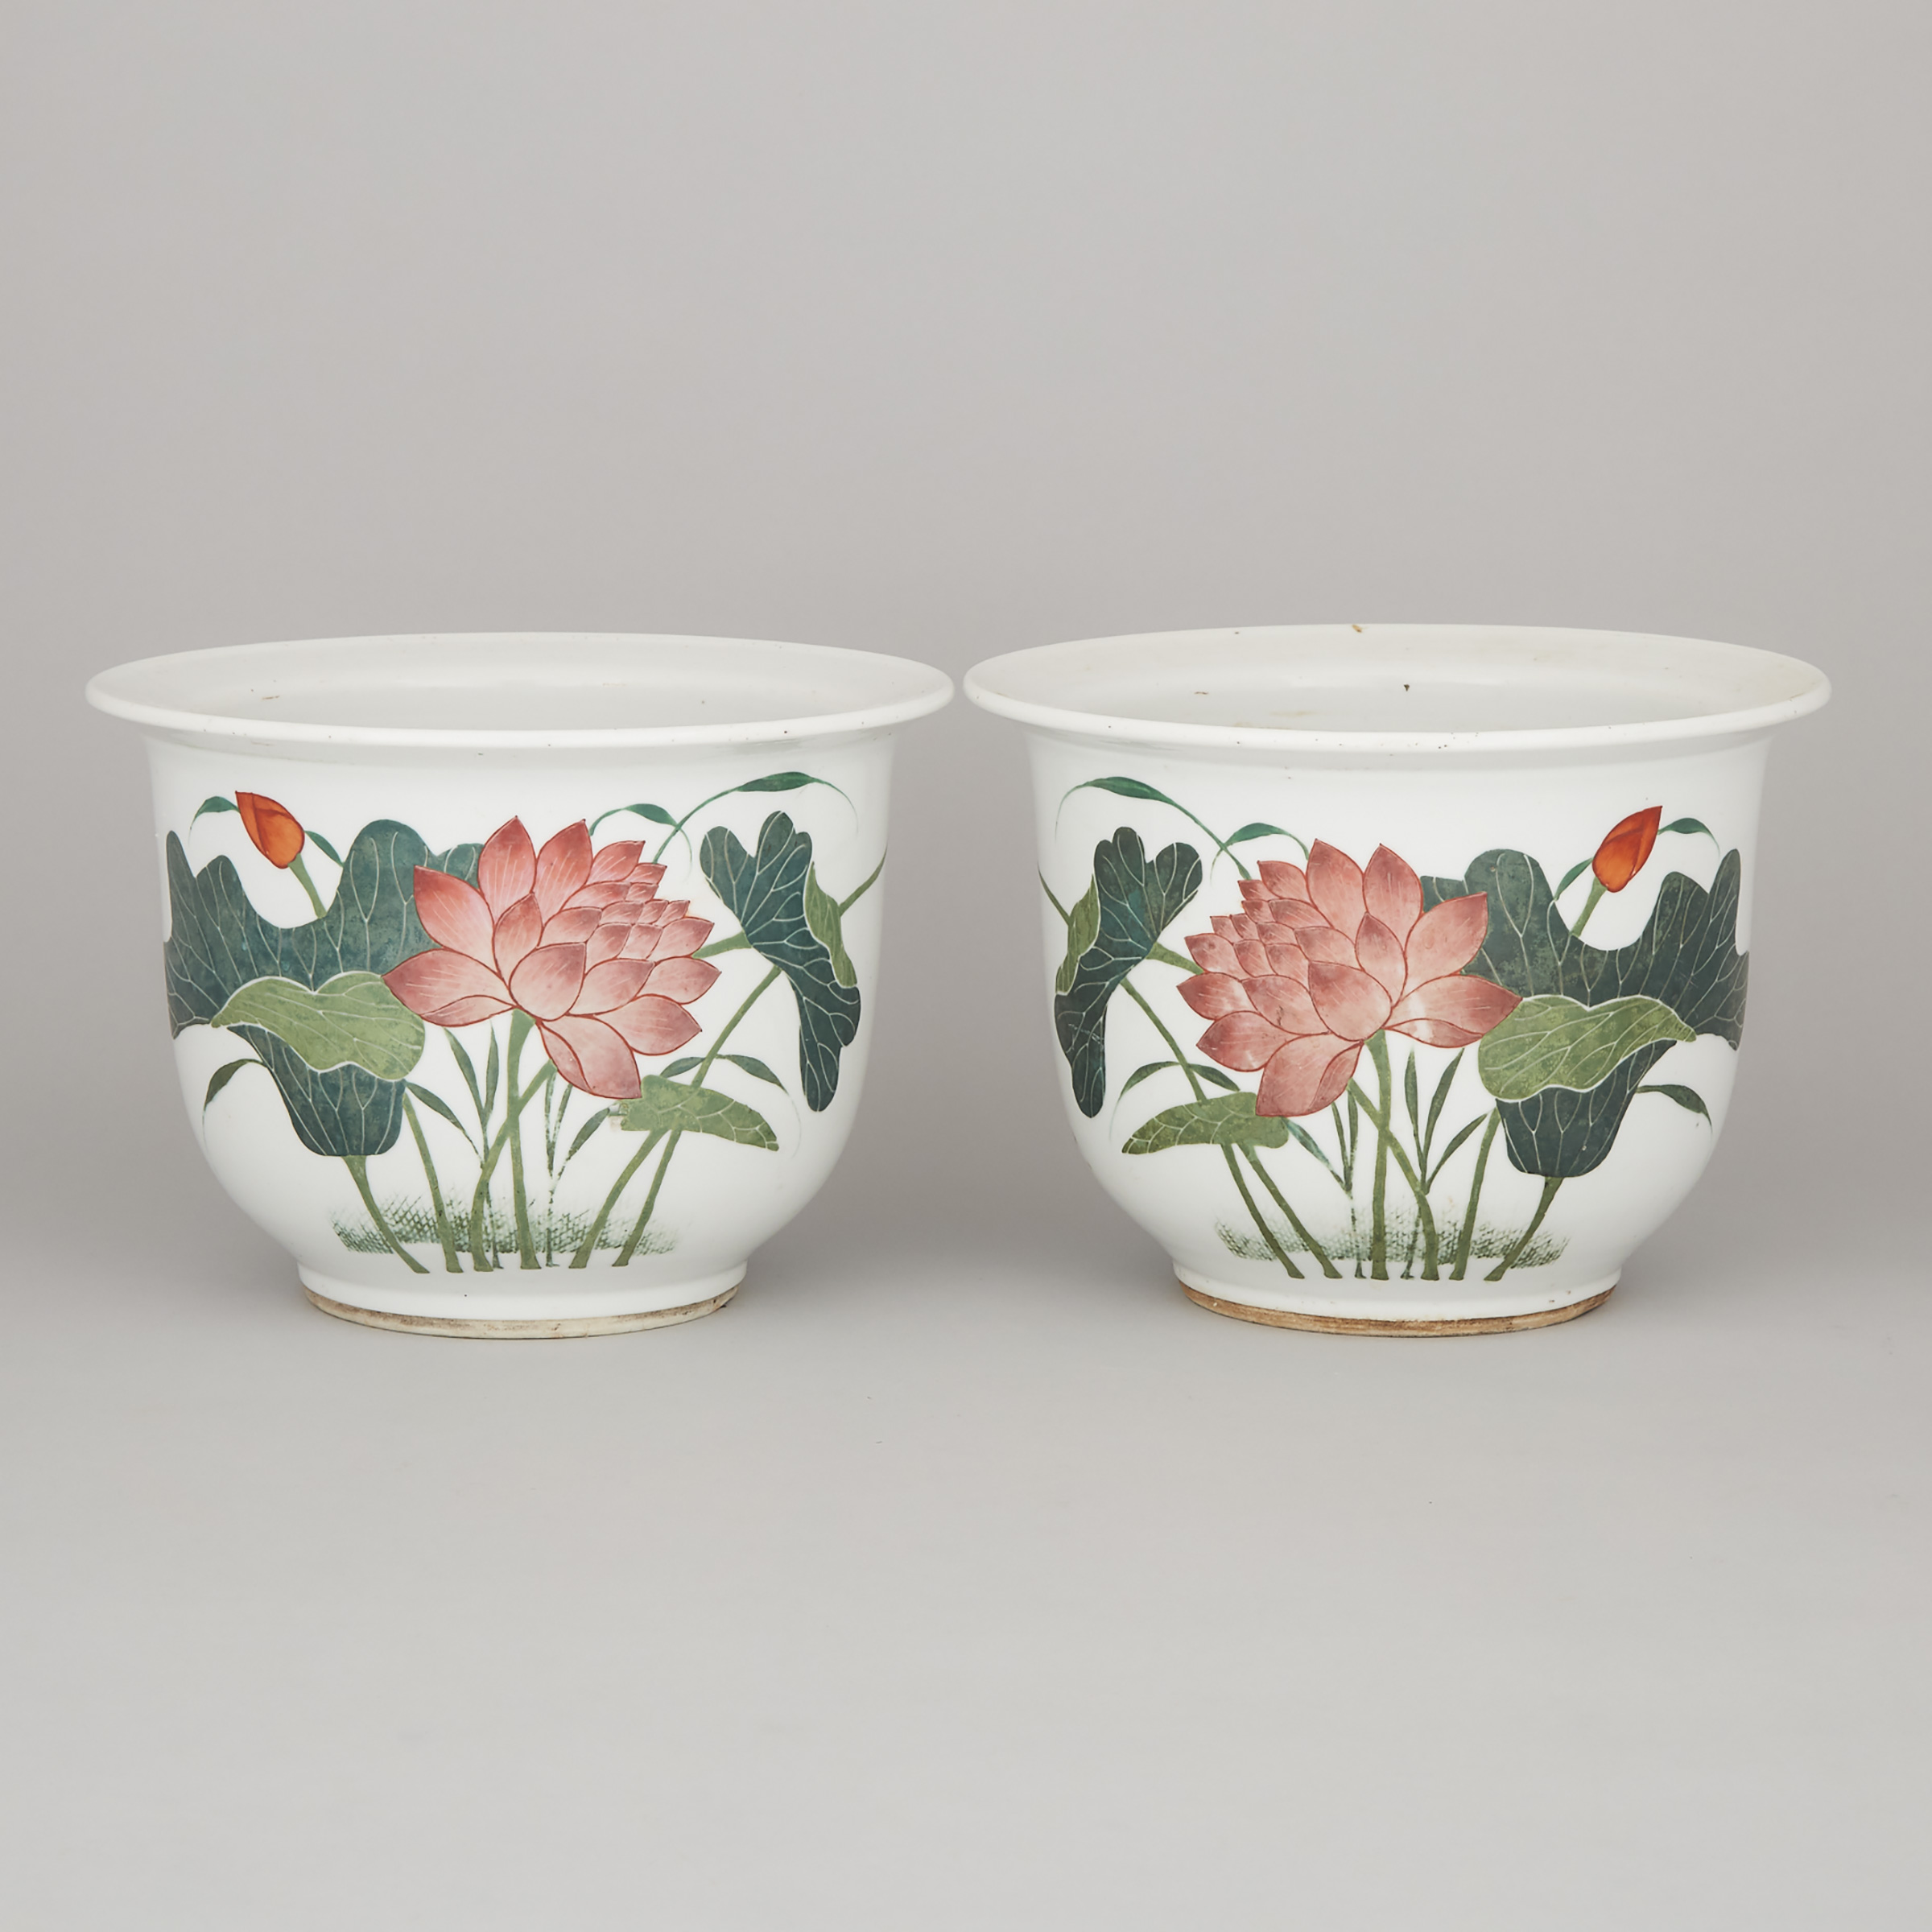 A Pair of Enameled Porcelain 'Lotus' Planters, Signed Dai Yucheng and Dated 1917